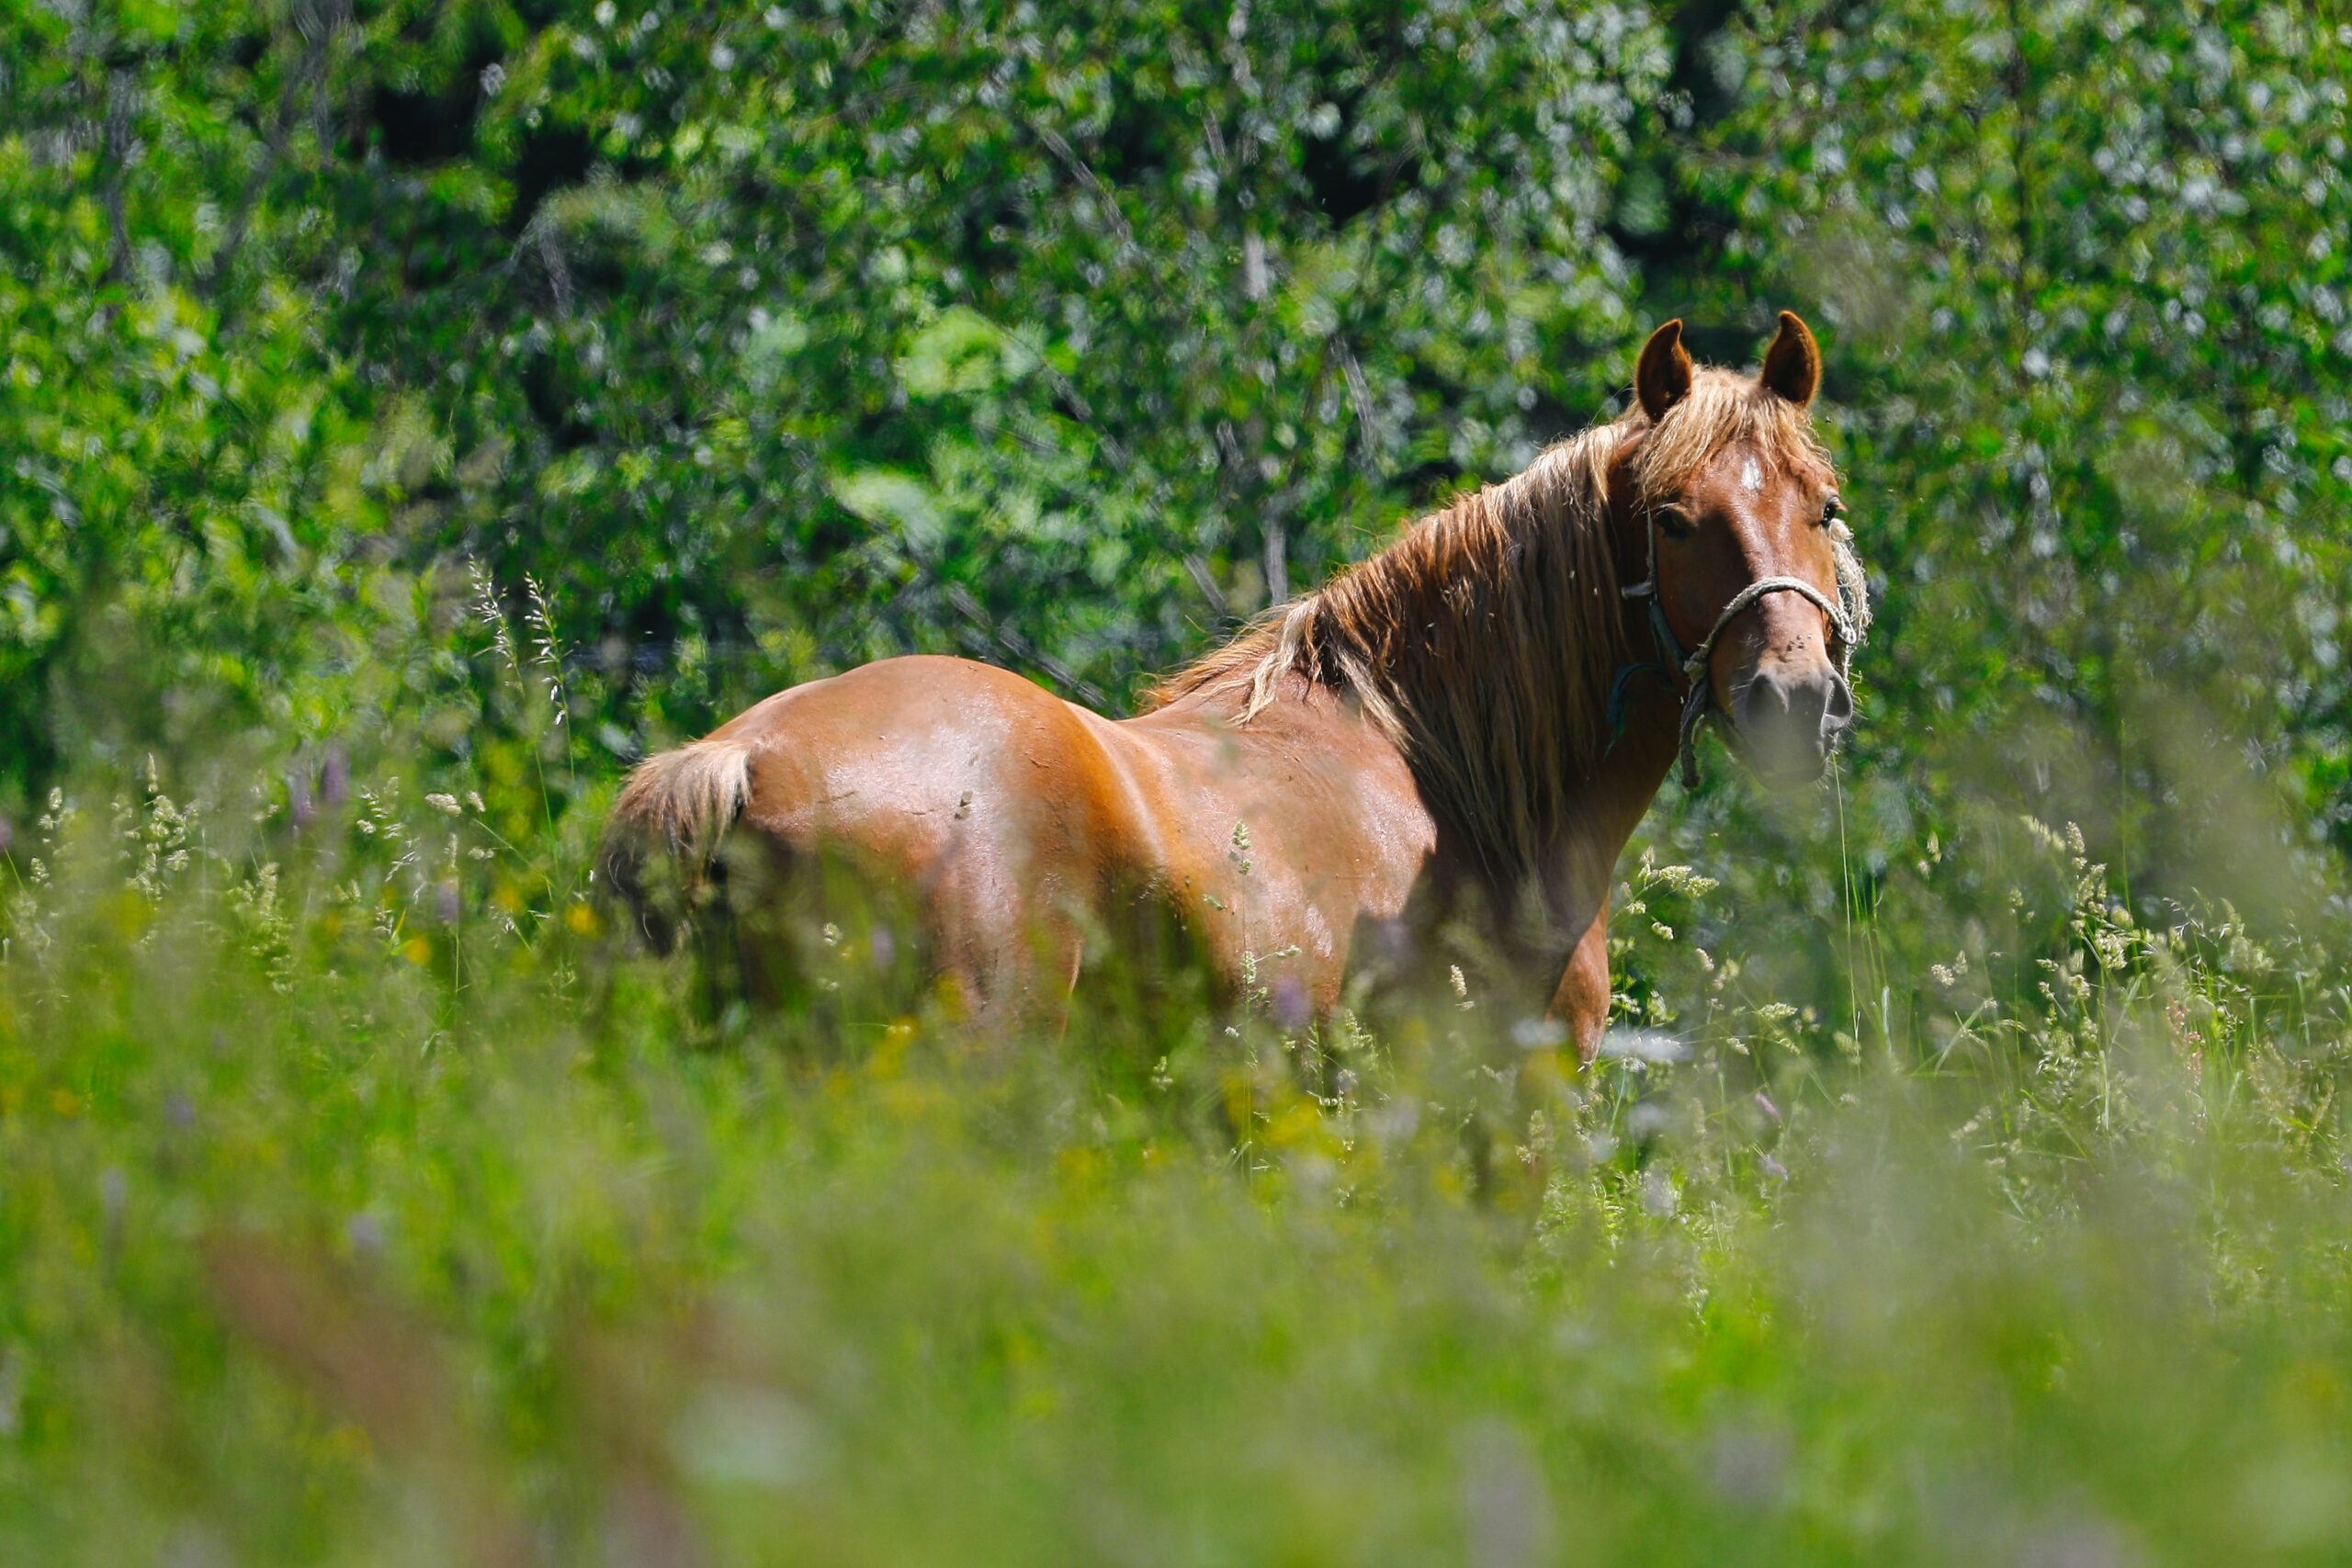 Can too much Grass cause Colic in Horses?